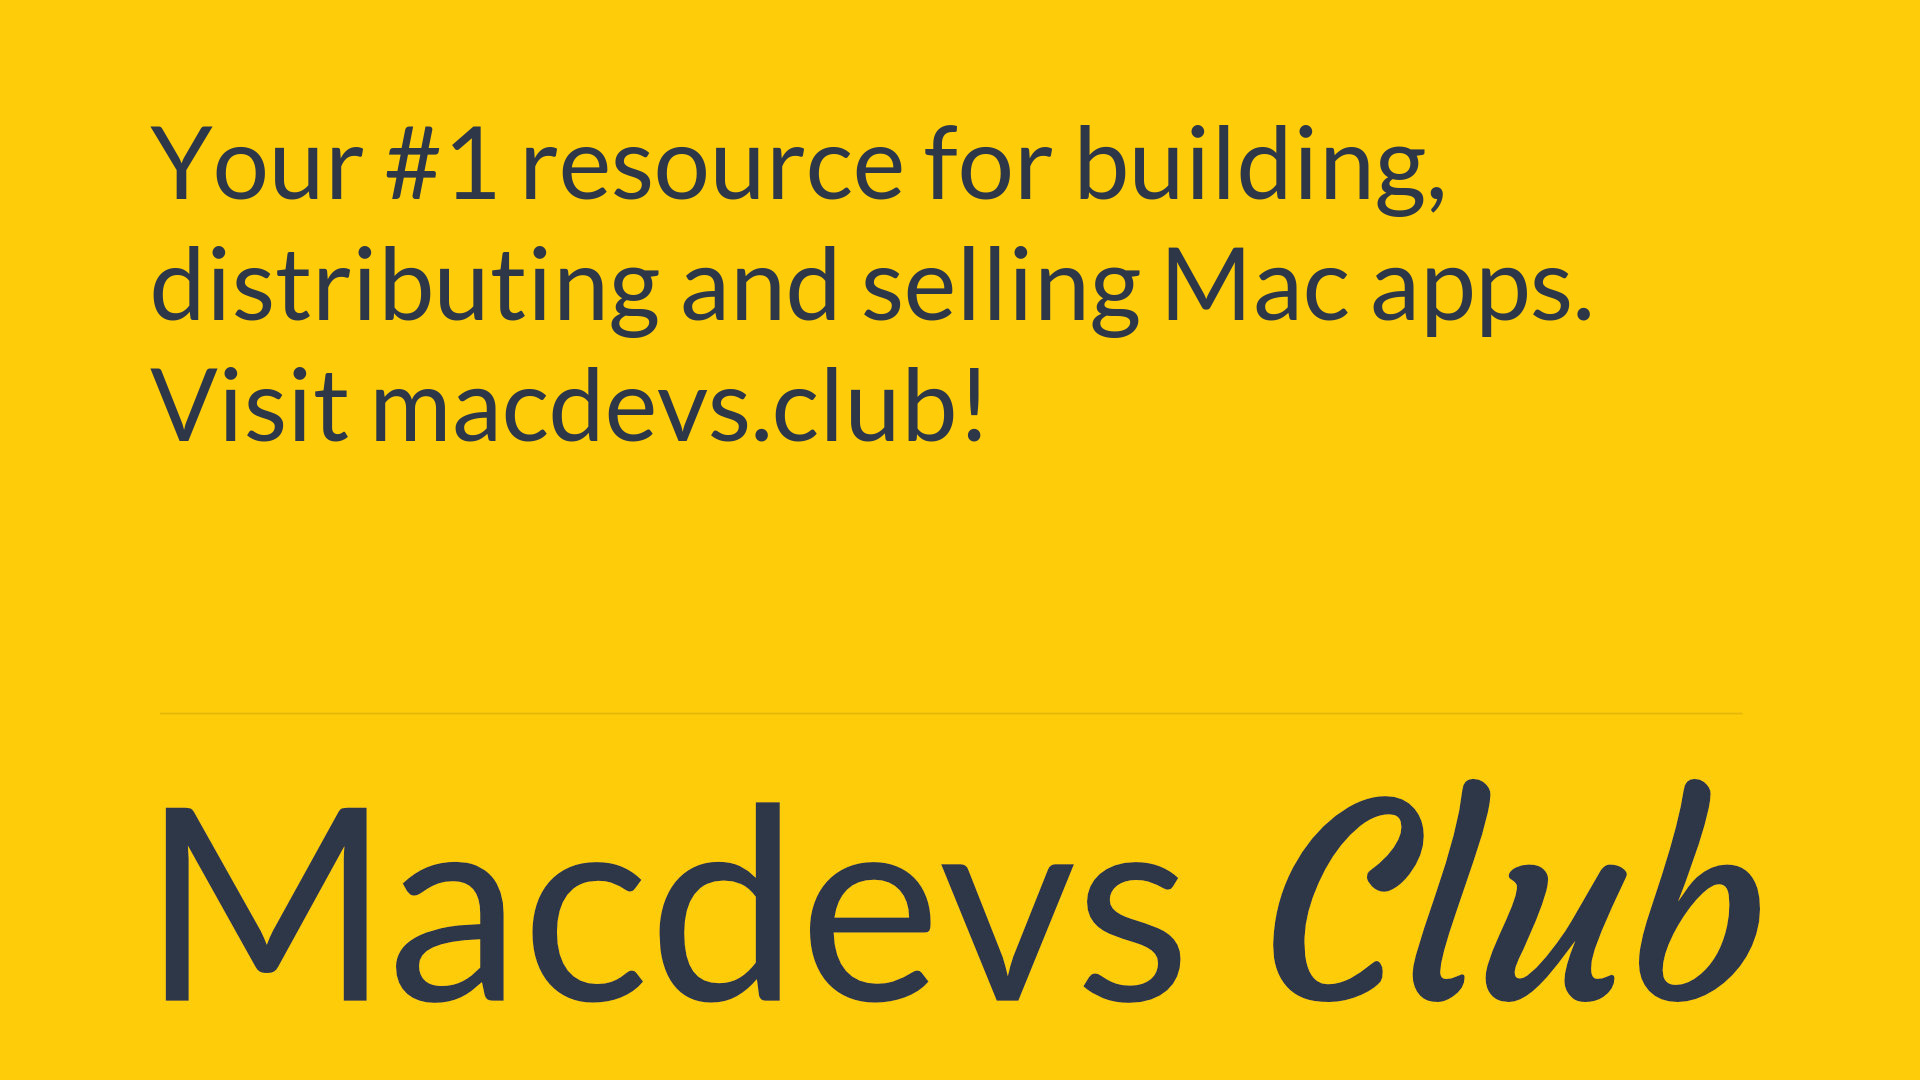 The settings used by macdevs.club